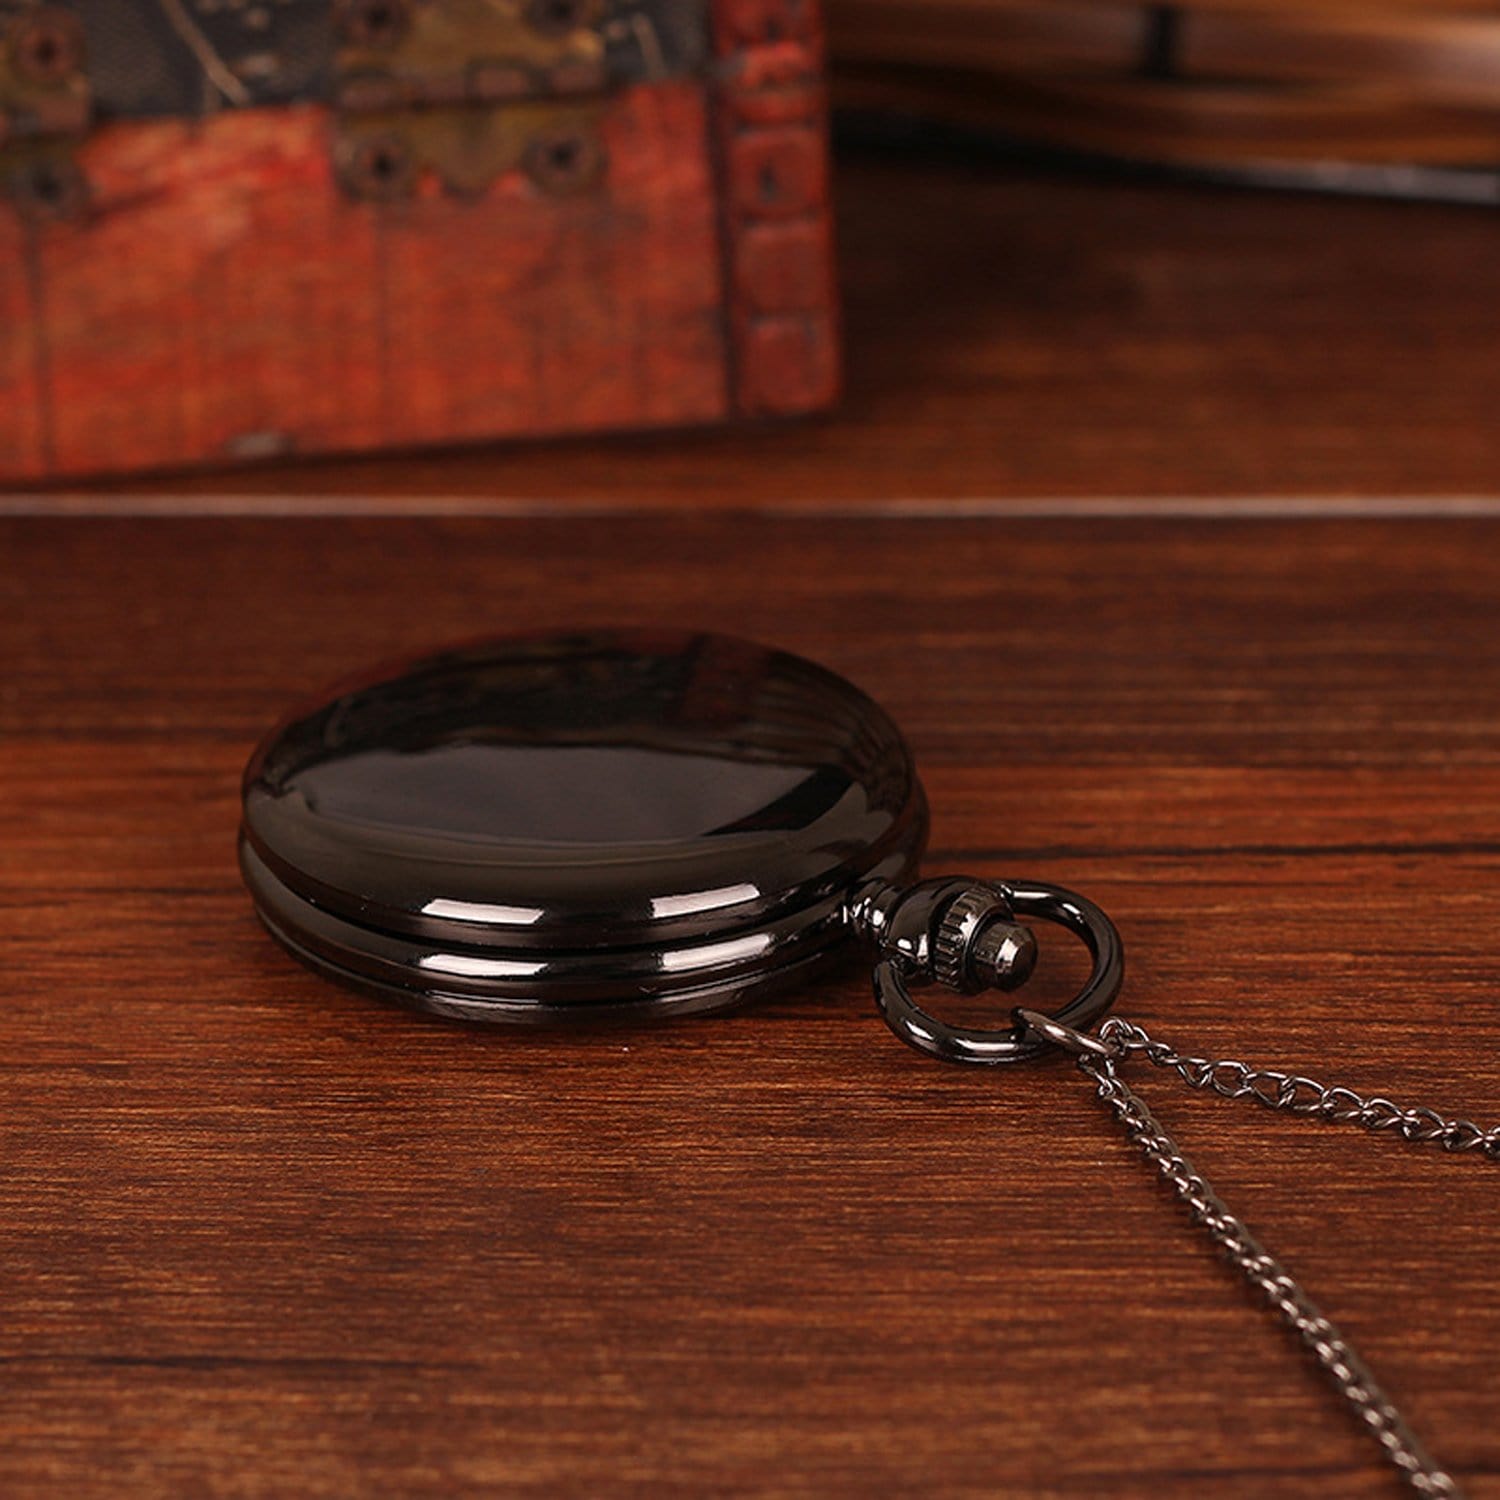 Pocket Watches To My Man - All Of My Lasts To Be With You Pocket Watch GiveMe-Gifts